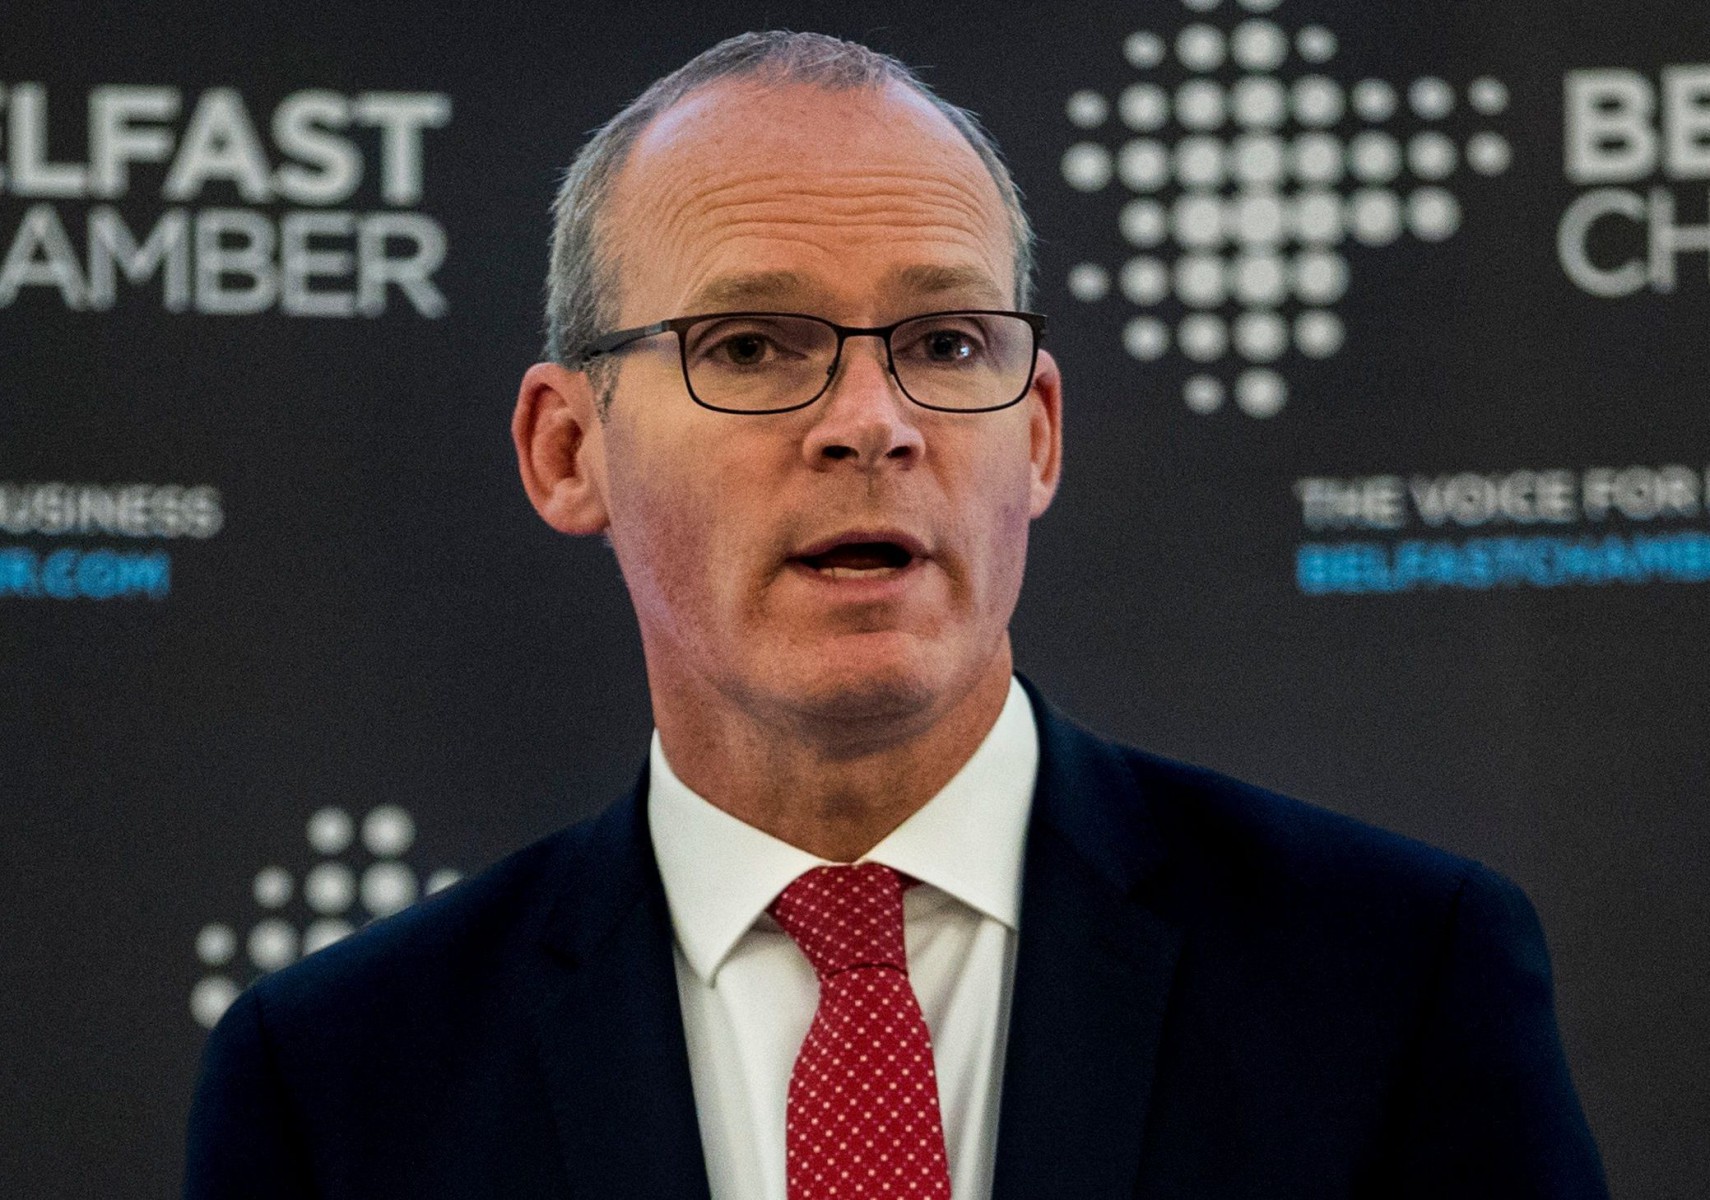 Irelands deputy PM Simon Coveney cast doubt on the PMs insistence a trade deal will be done by the end of next year